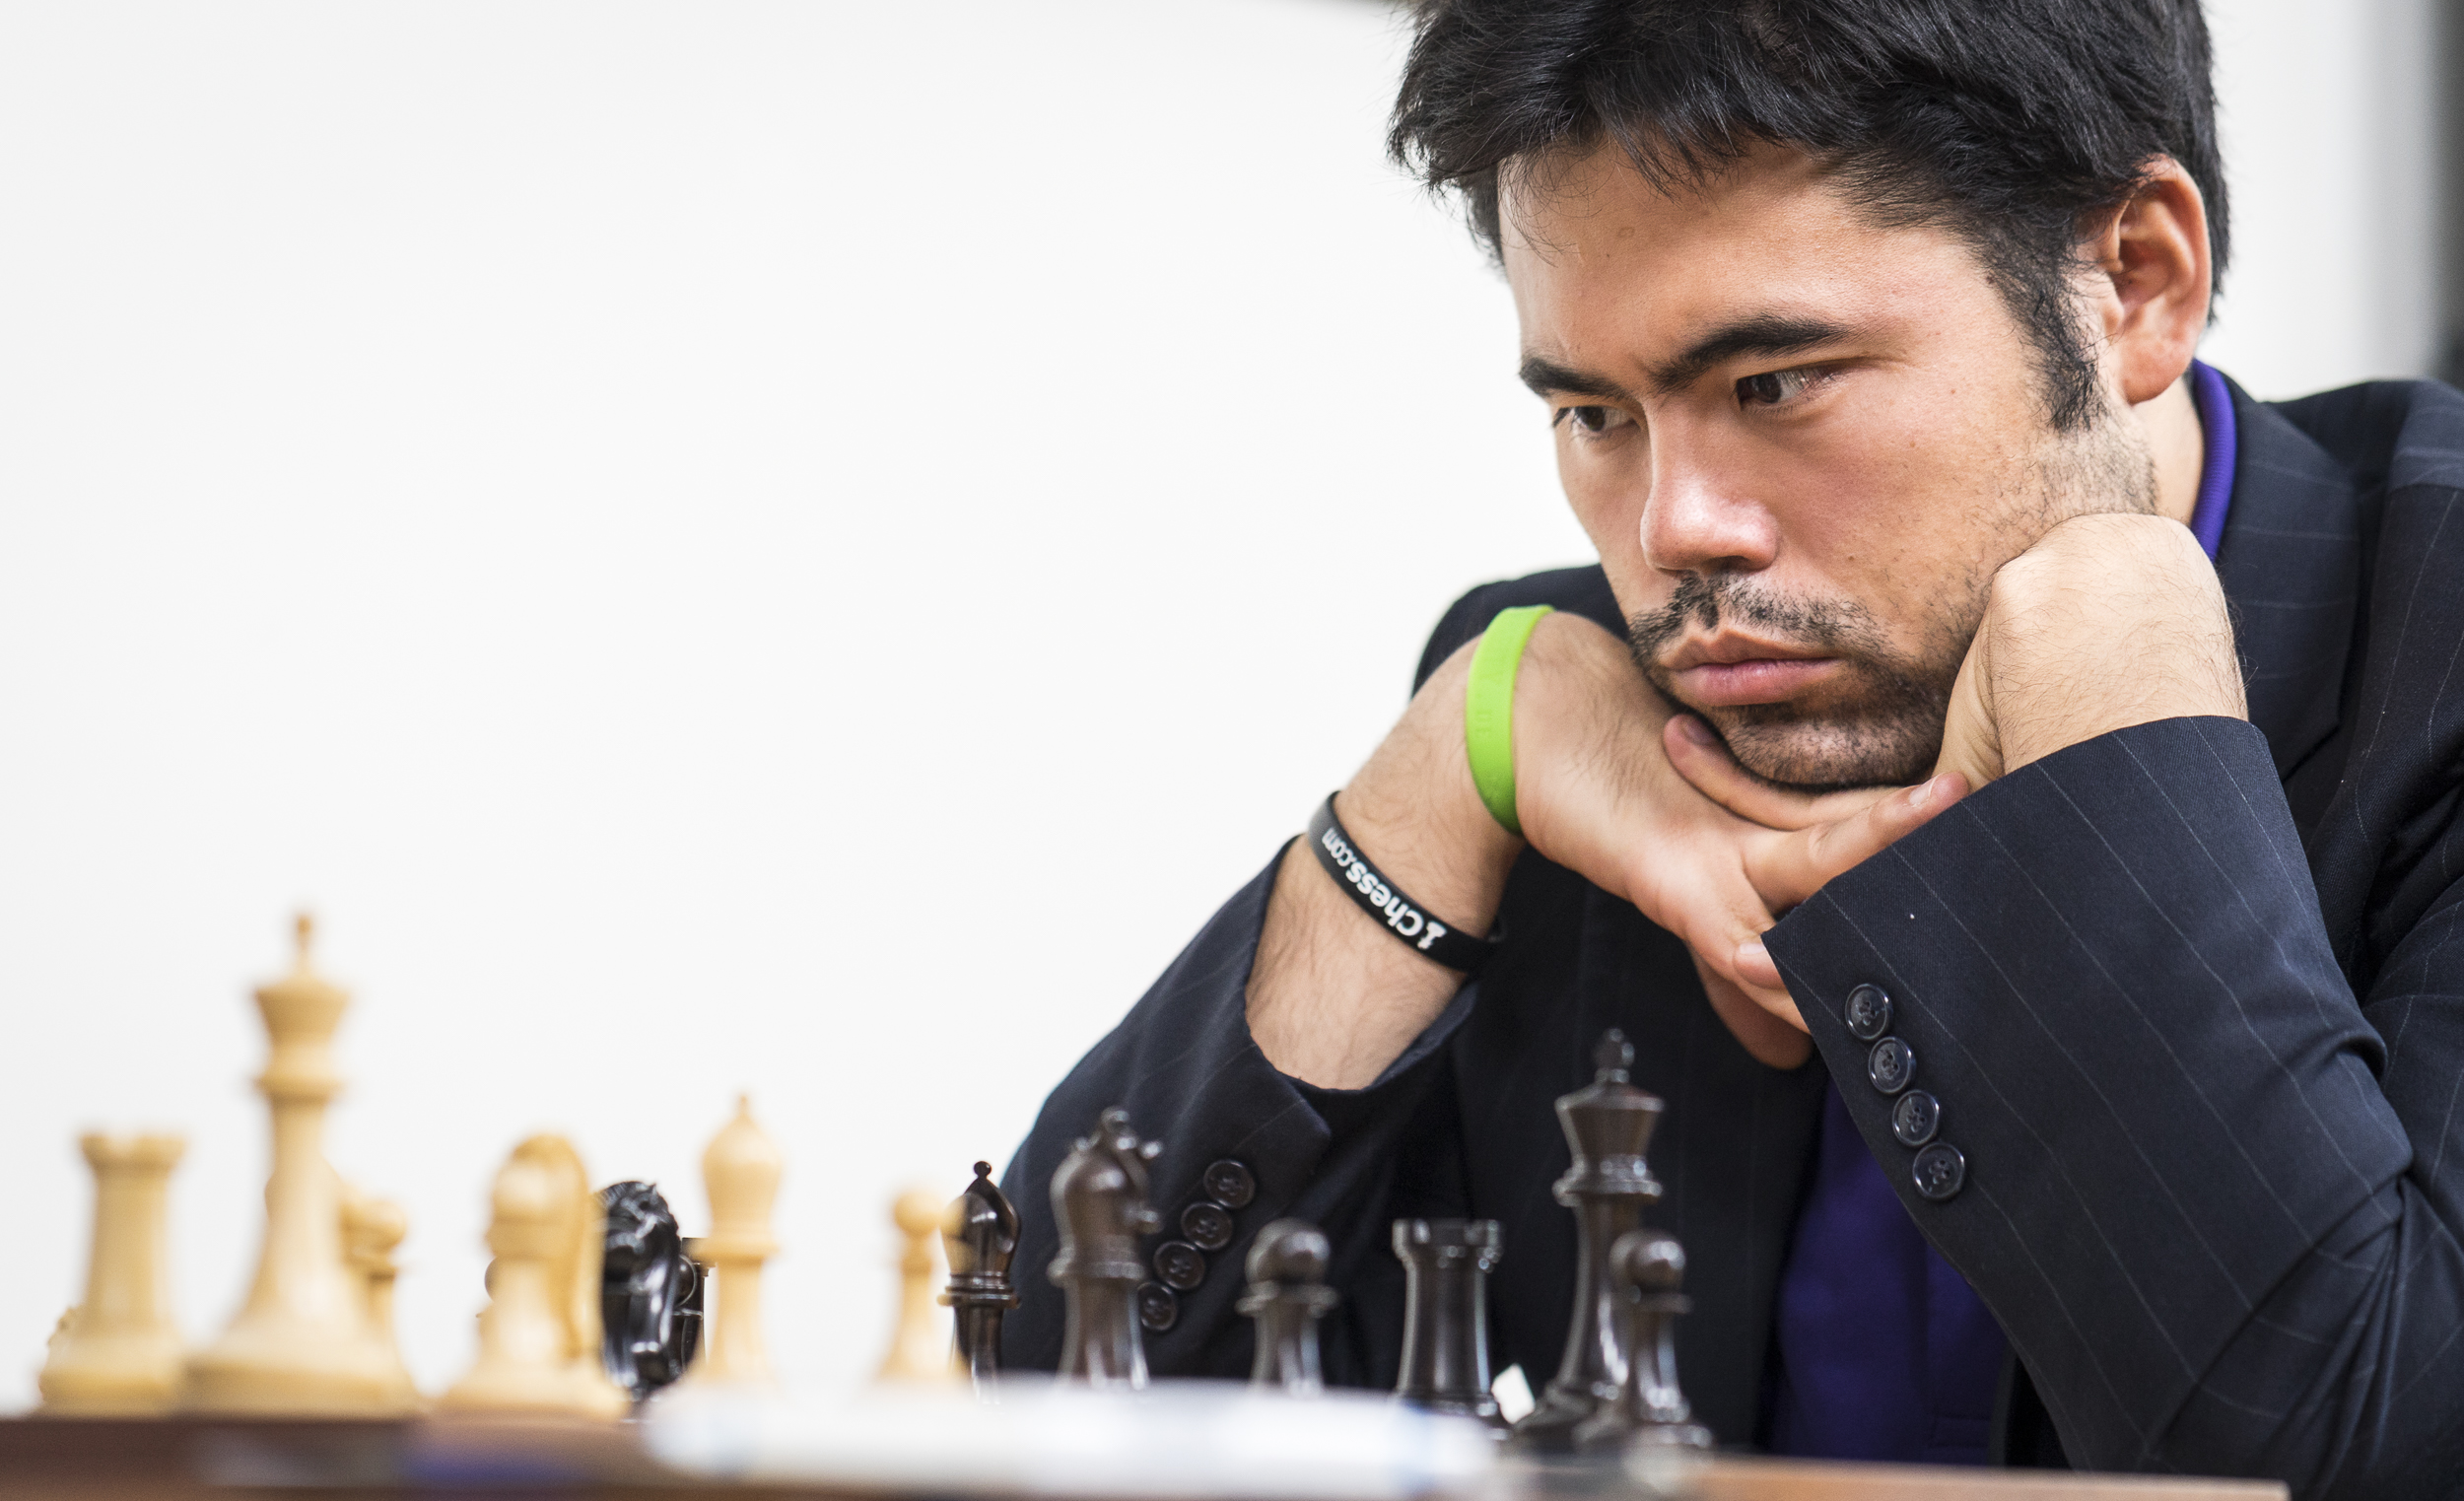 The US #1 Chess player, Hikaru Nakamura is a Vancouver Canuck fan